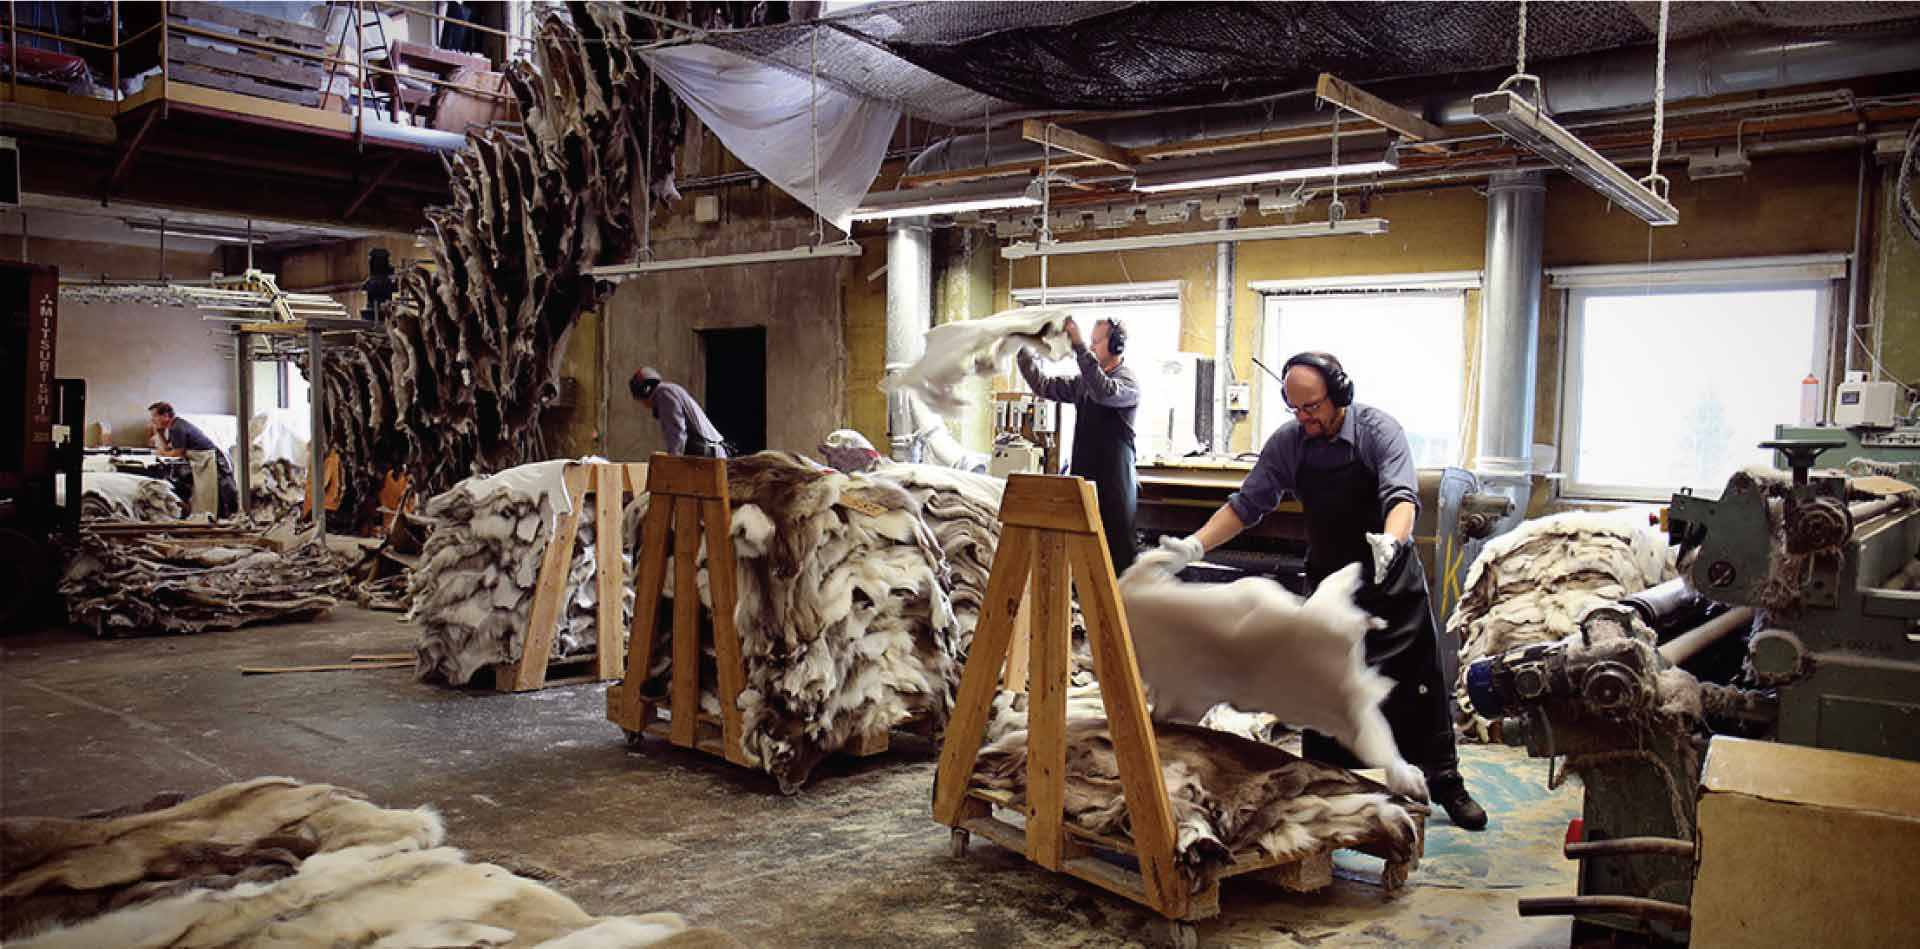 Tannery management